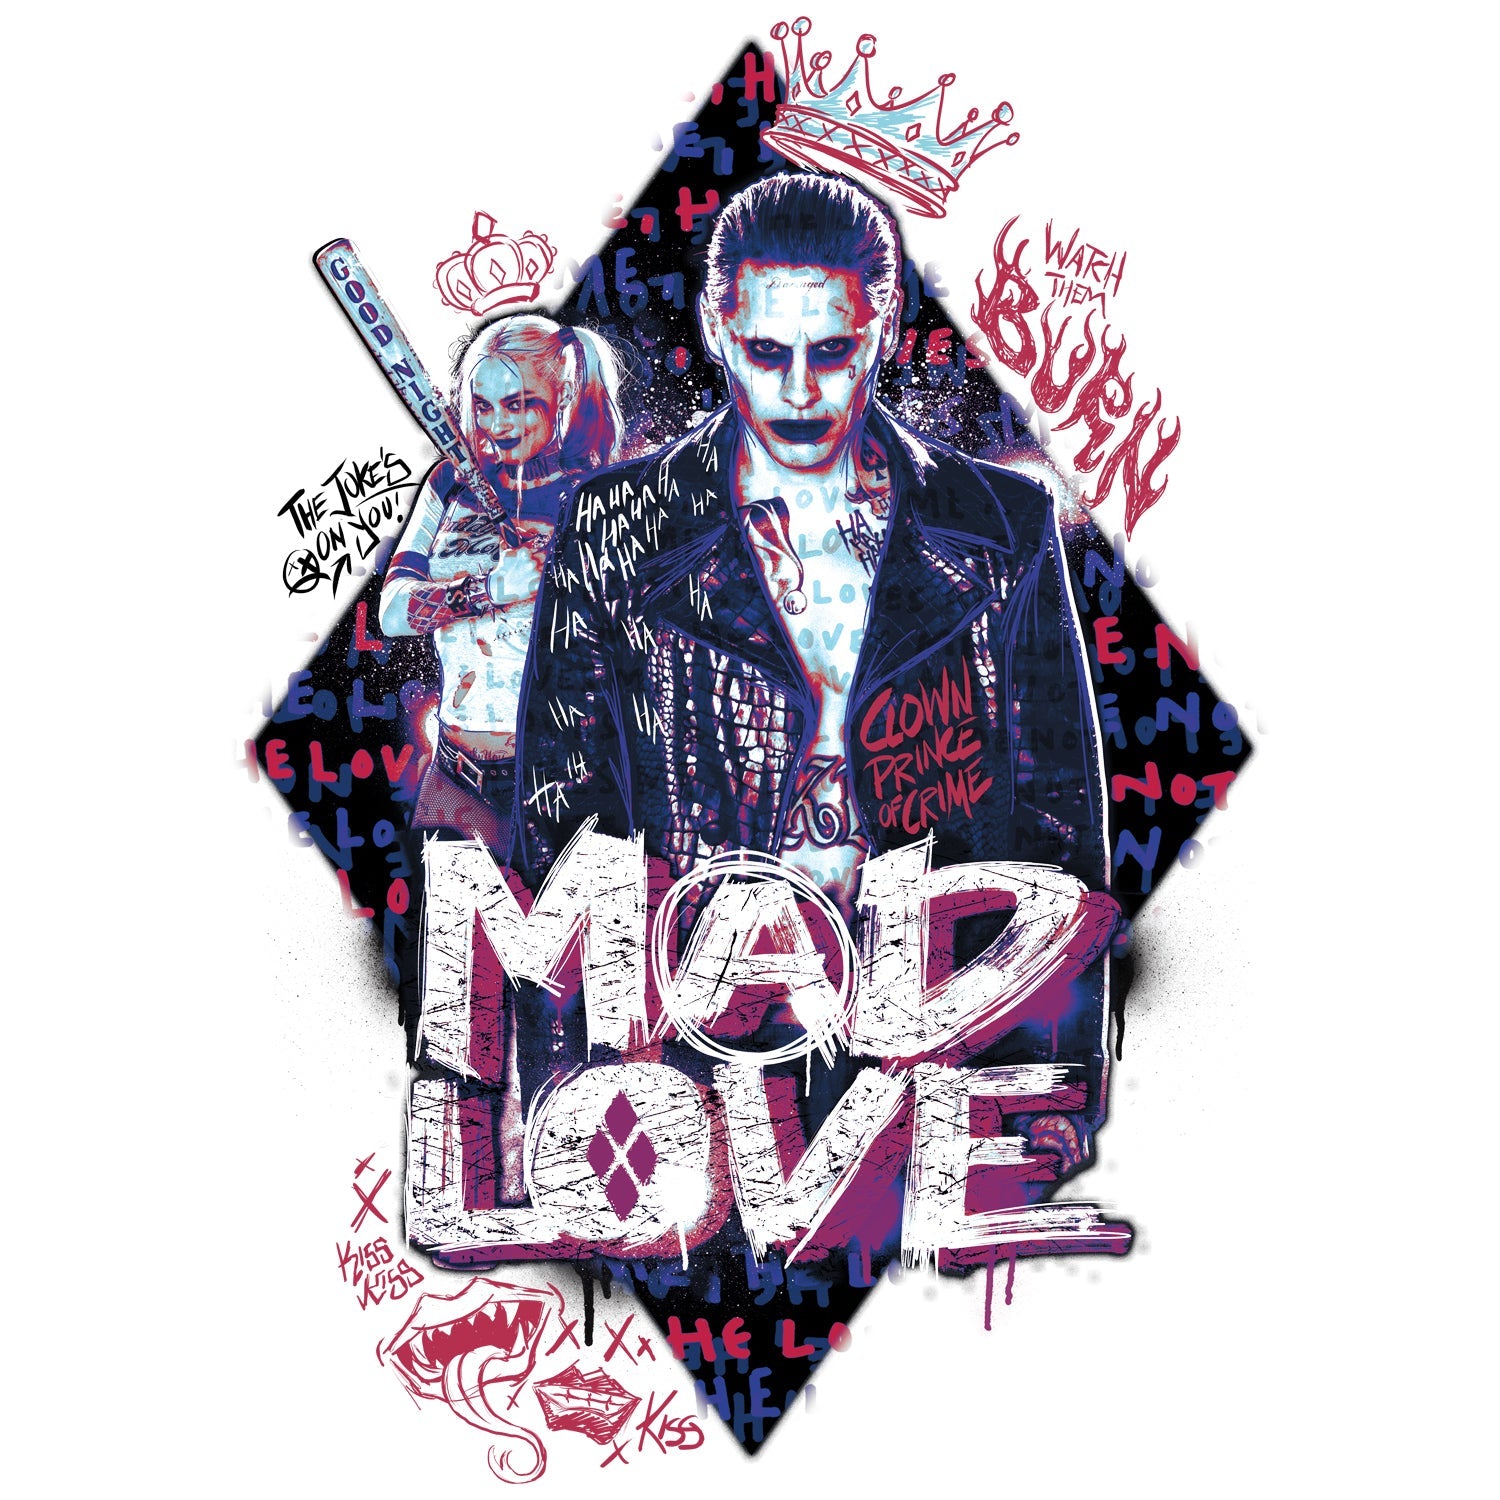 DC Suicide Squad Joker-Harley Quinn Mad Love Official Women's T-shirt ()